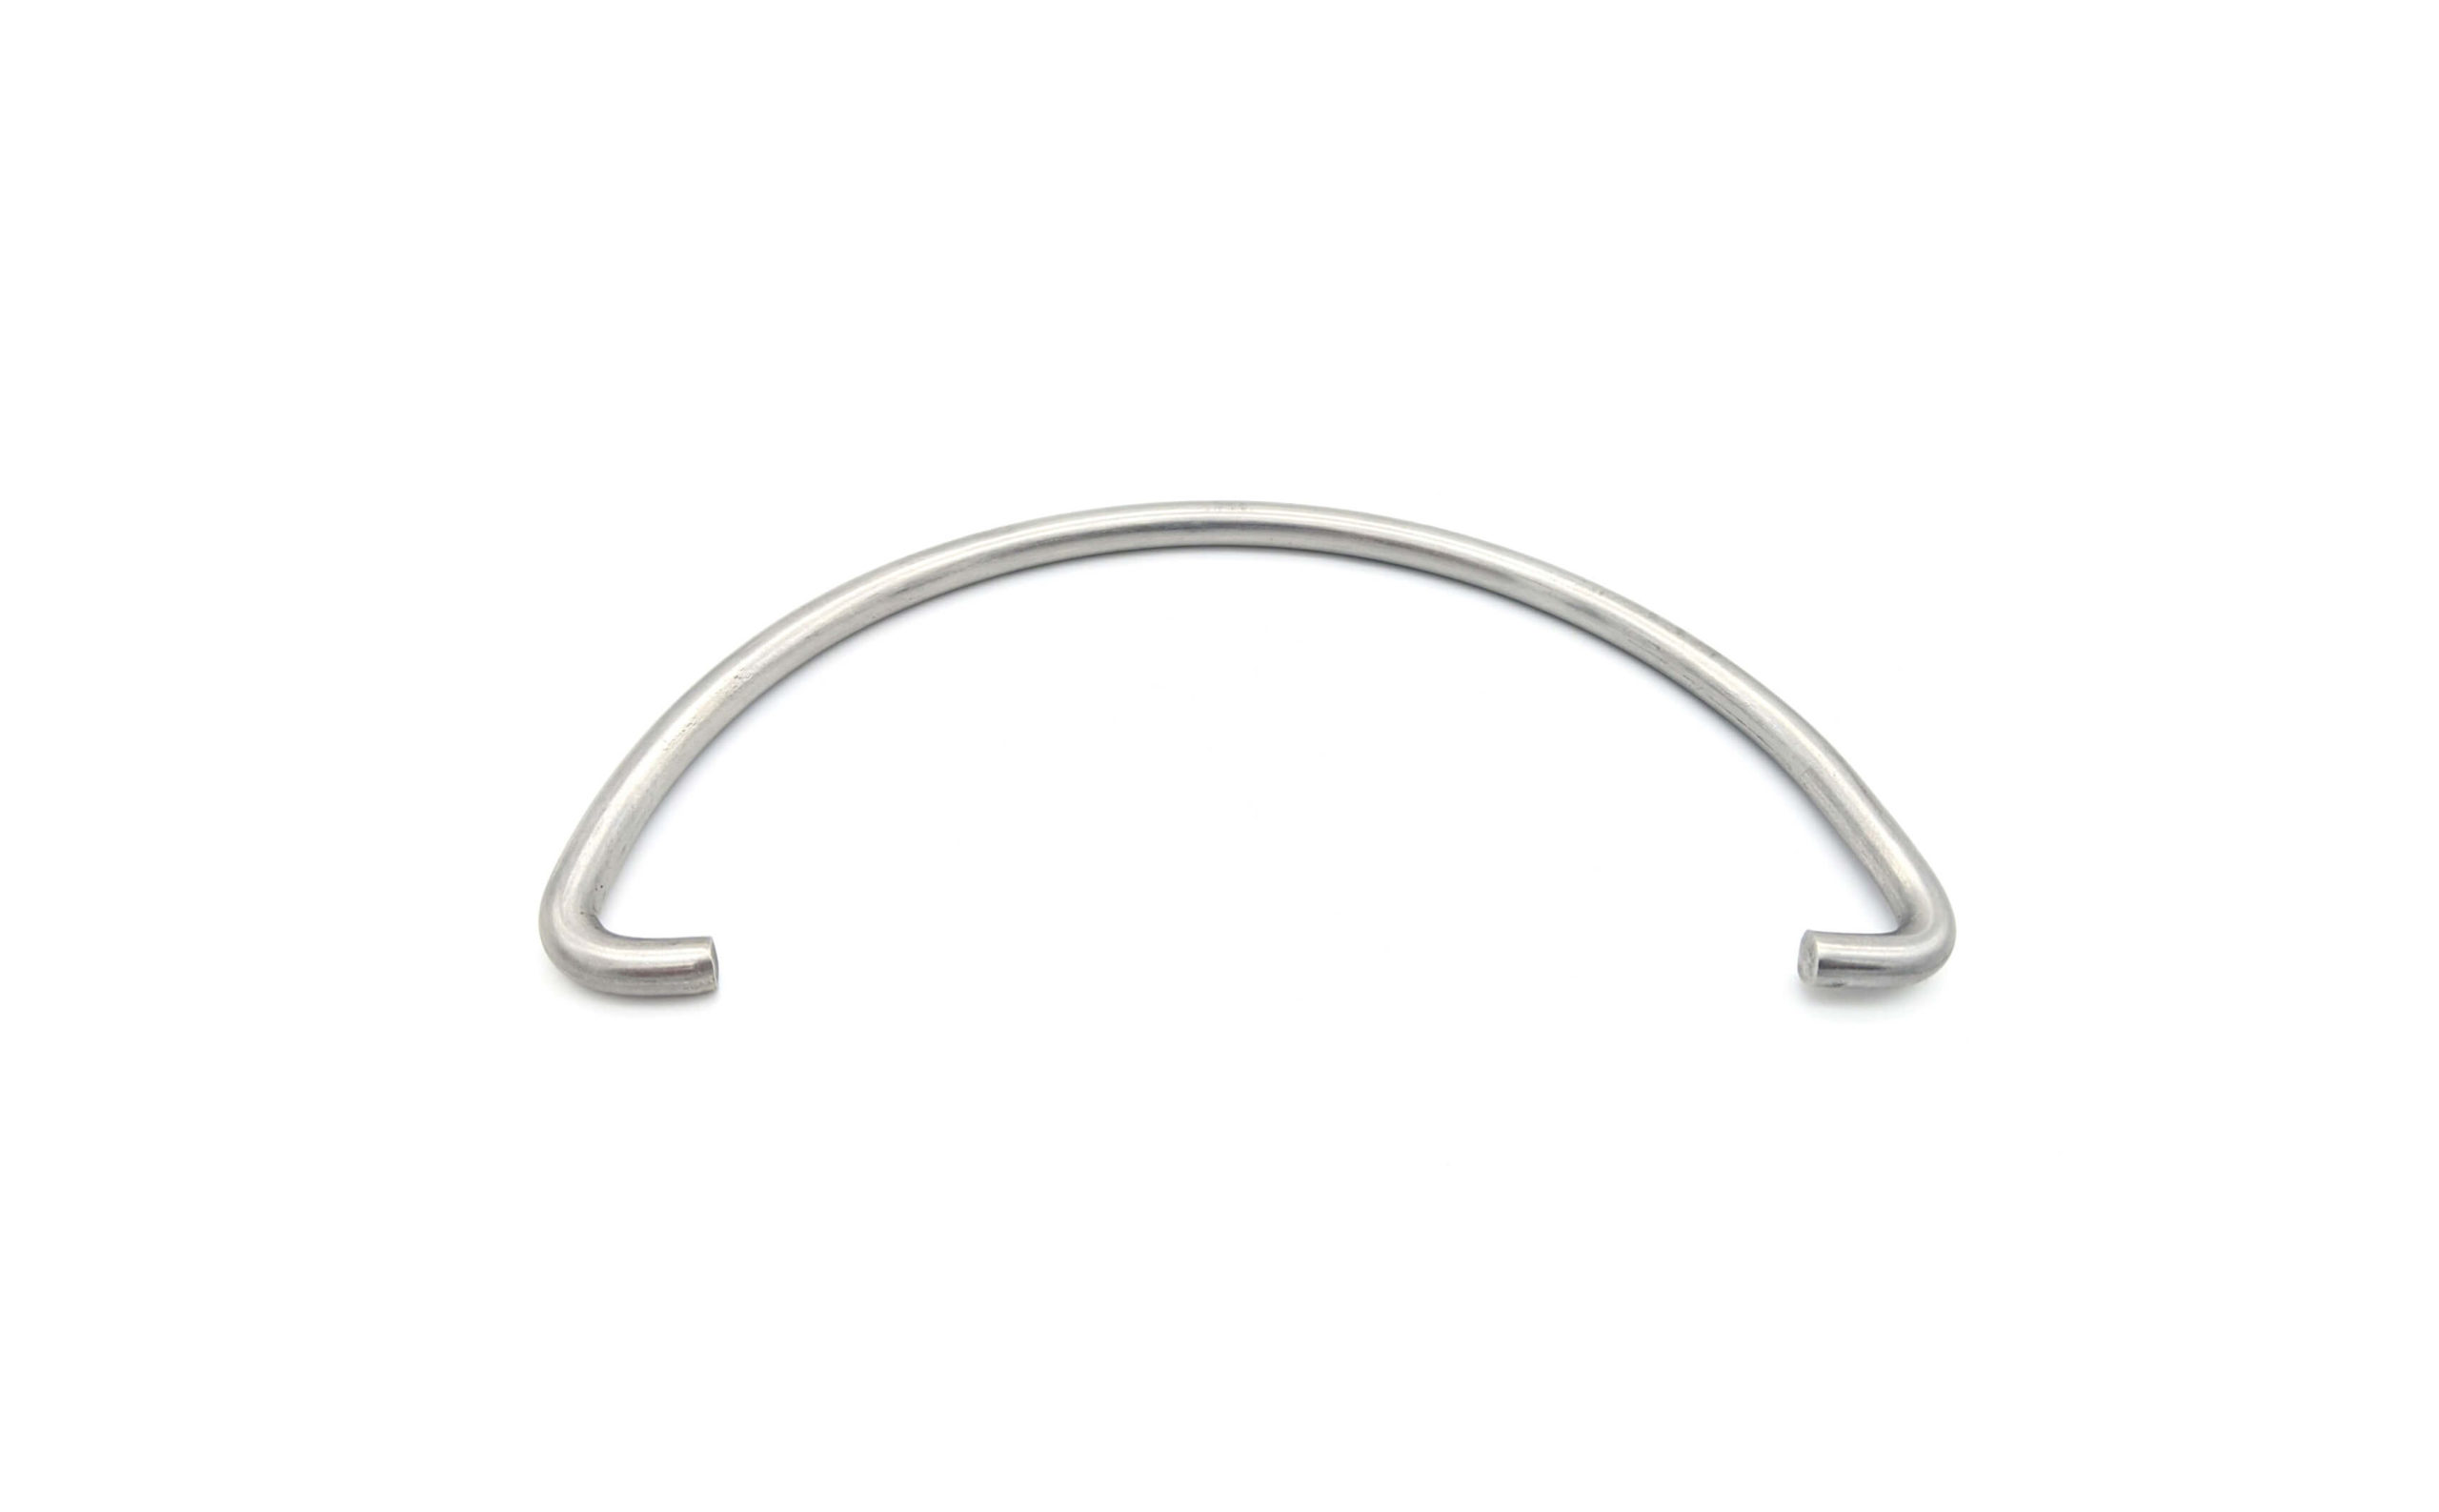 Stainless steel wire handle